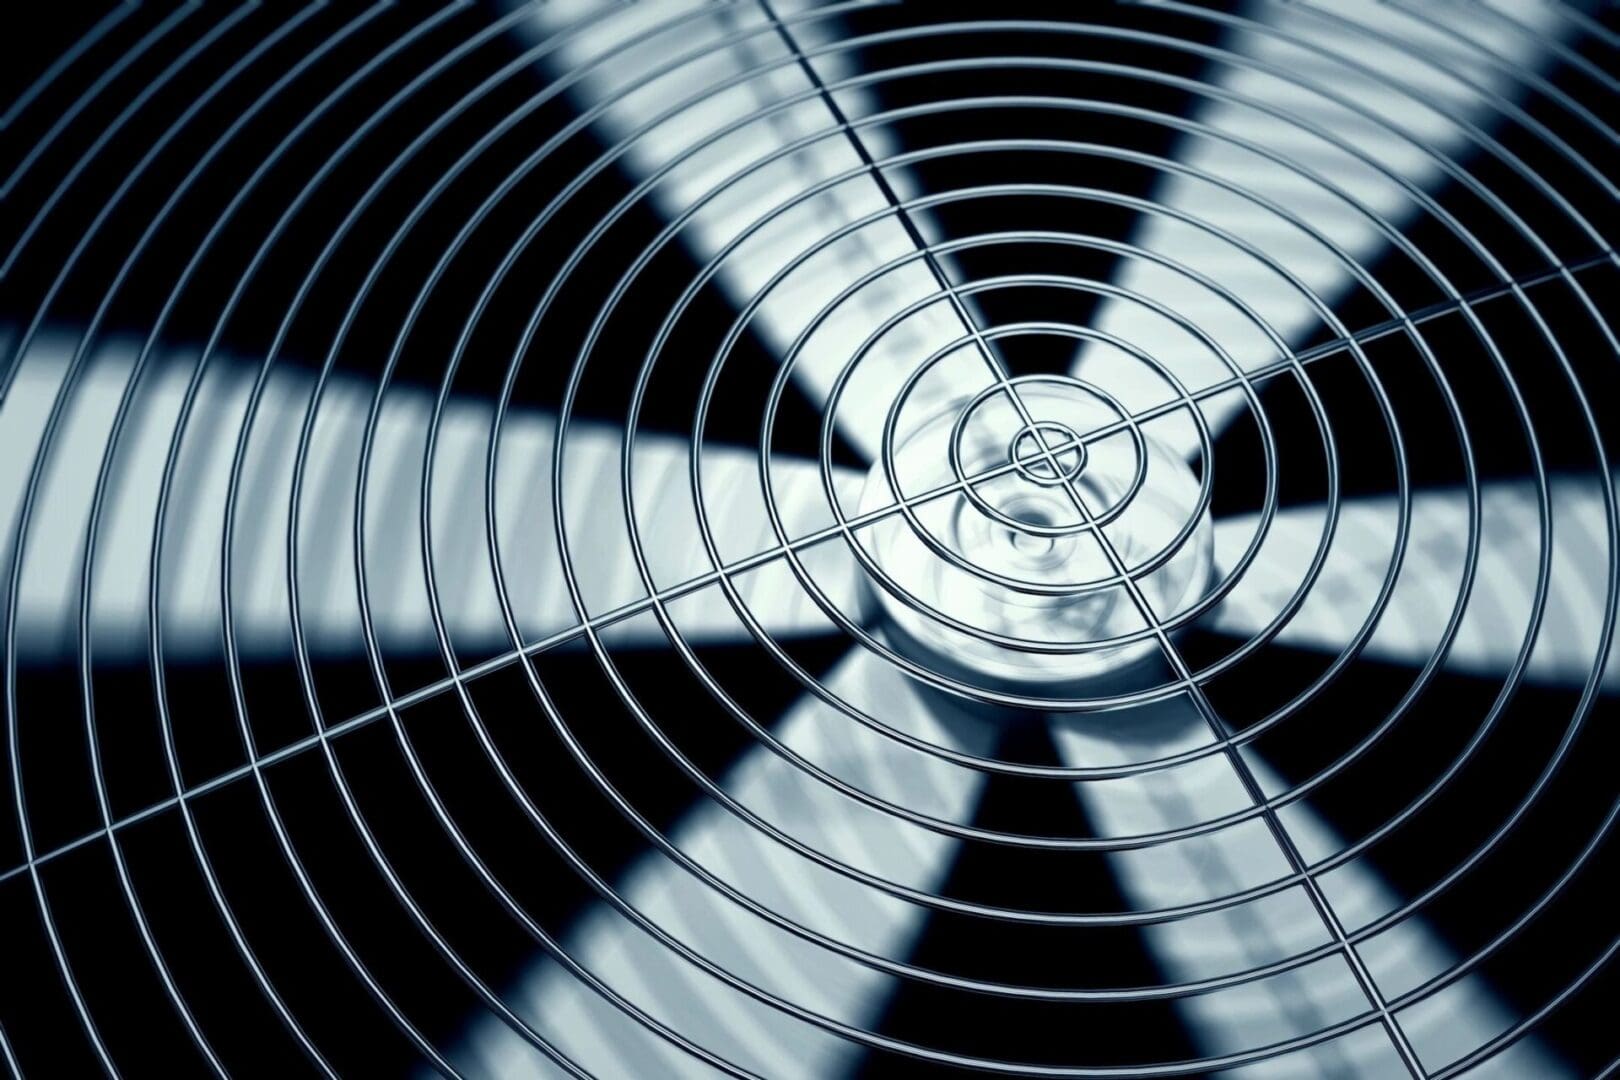 A close up of the blades on an air conditioner